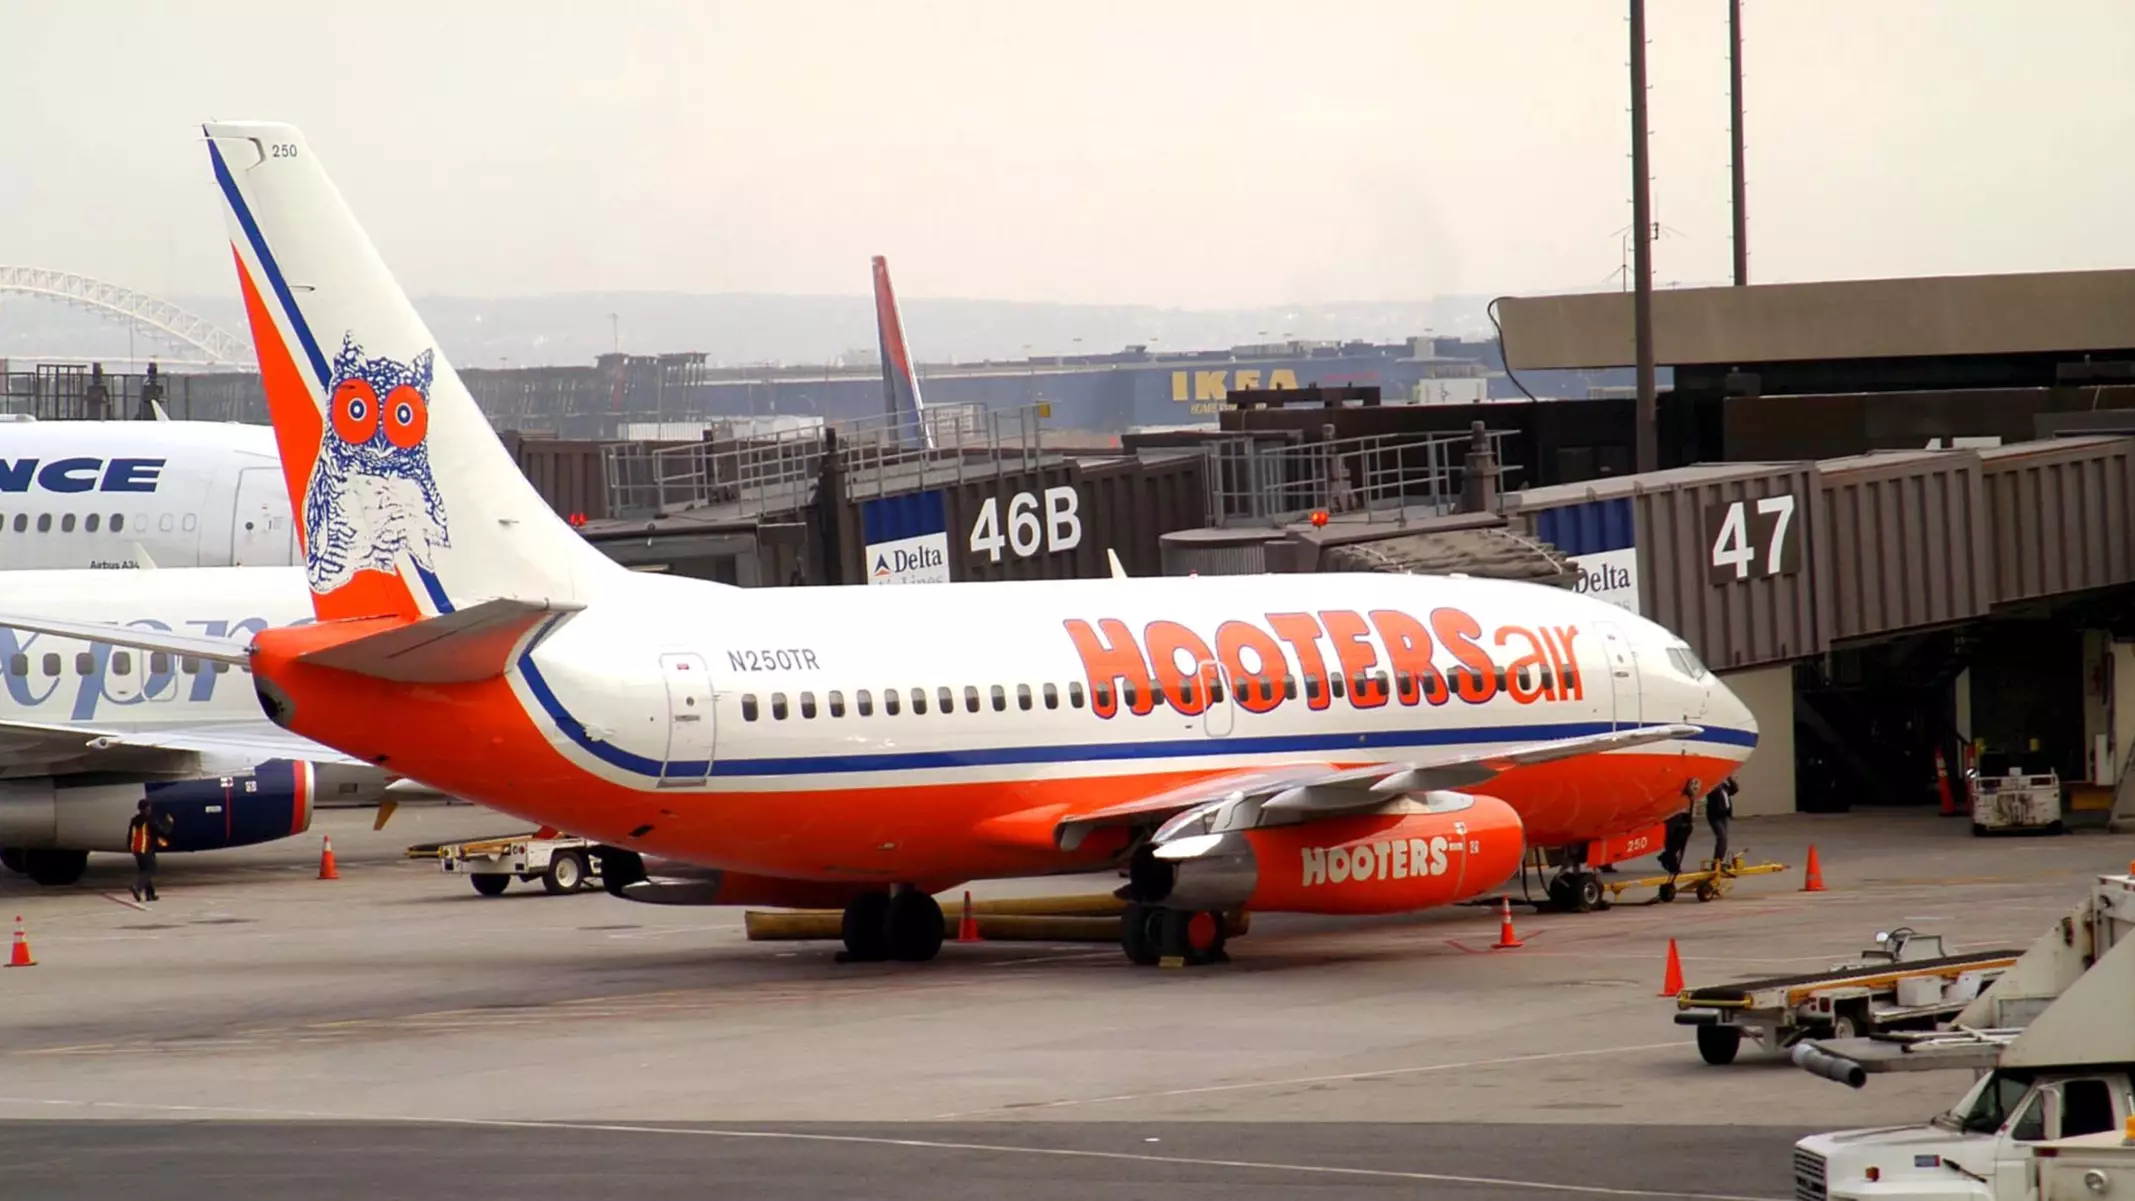 Hooters Launched An Airline That Went Bust After Three Years